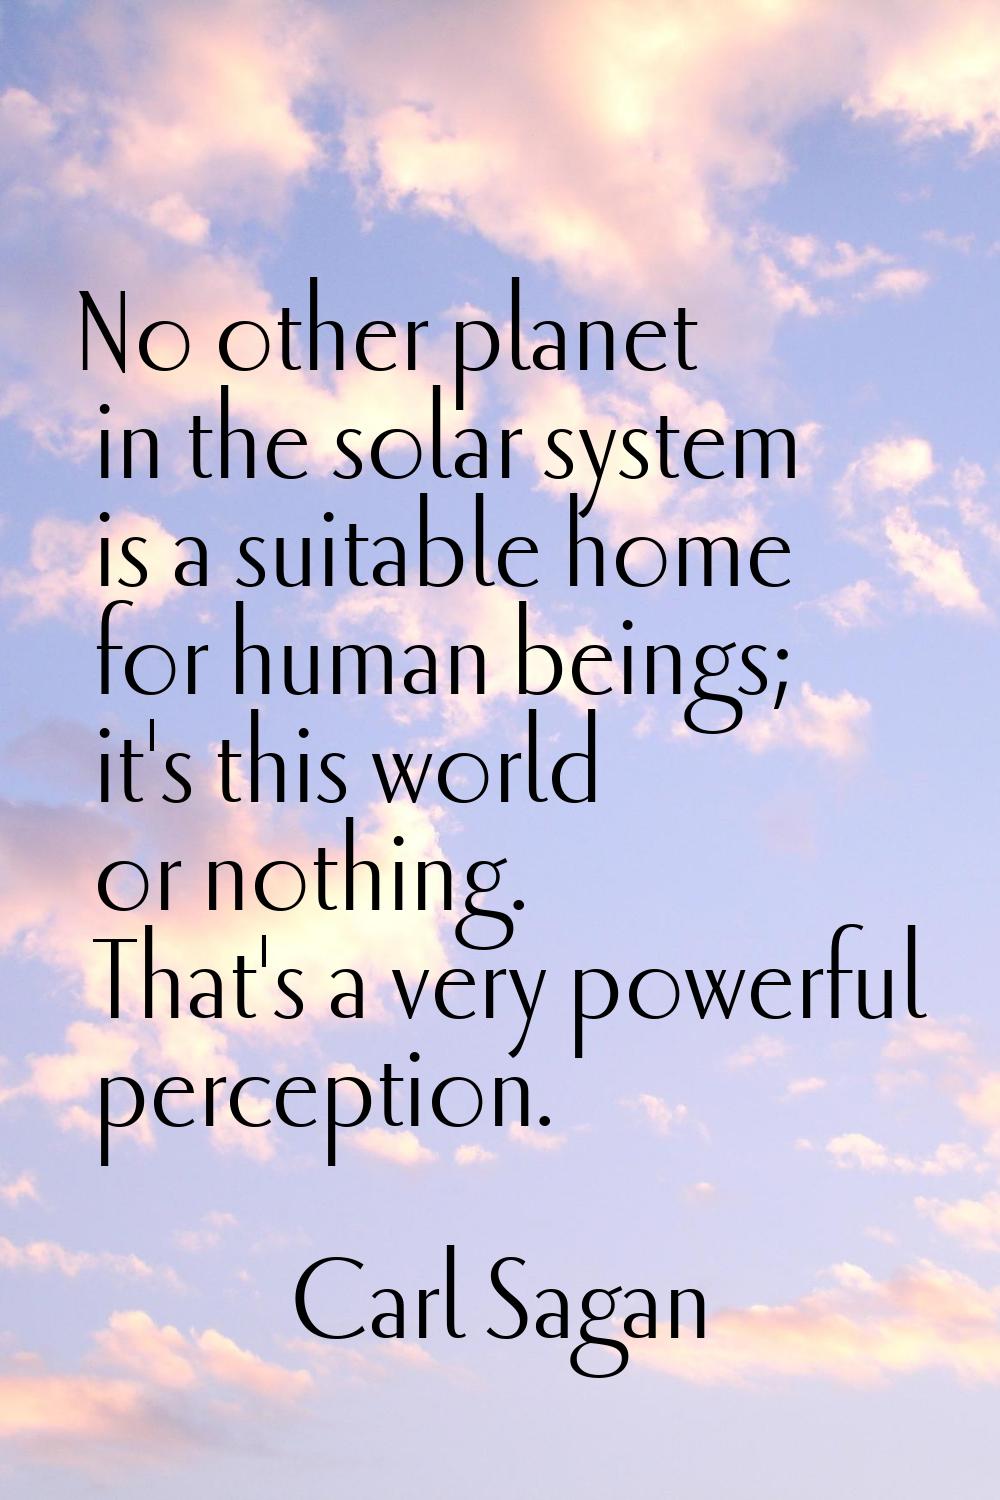 No other planet in the solar system is a suitable home for human beings; it's this world or nothing